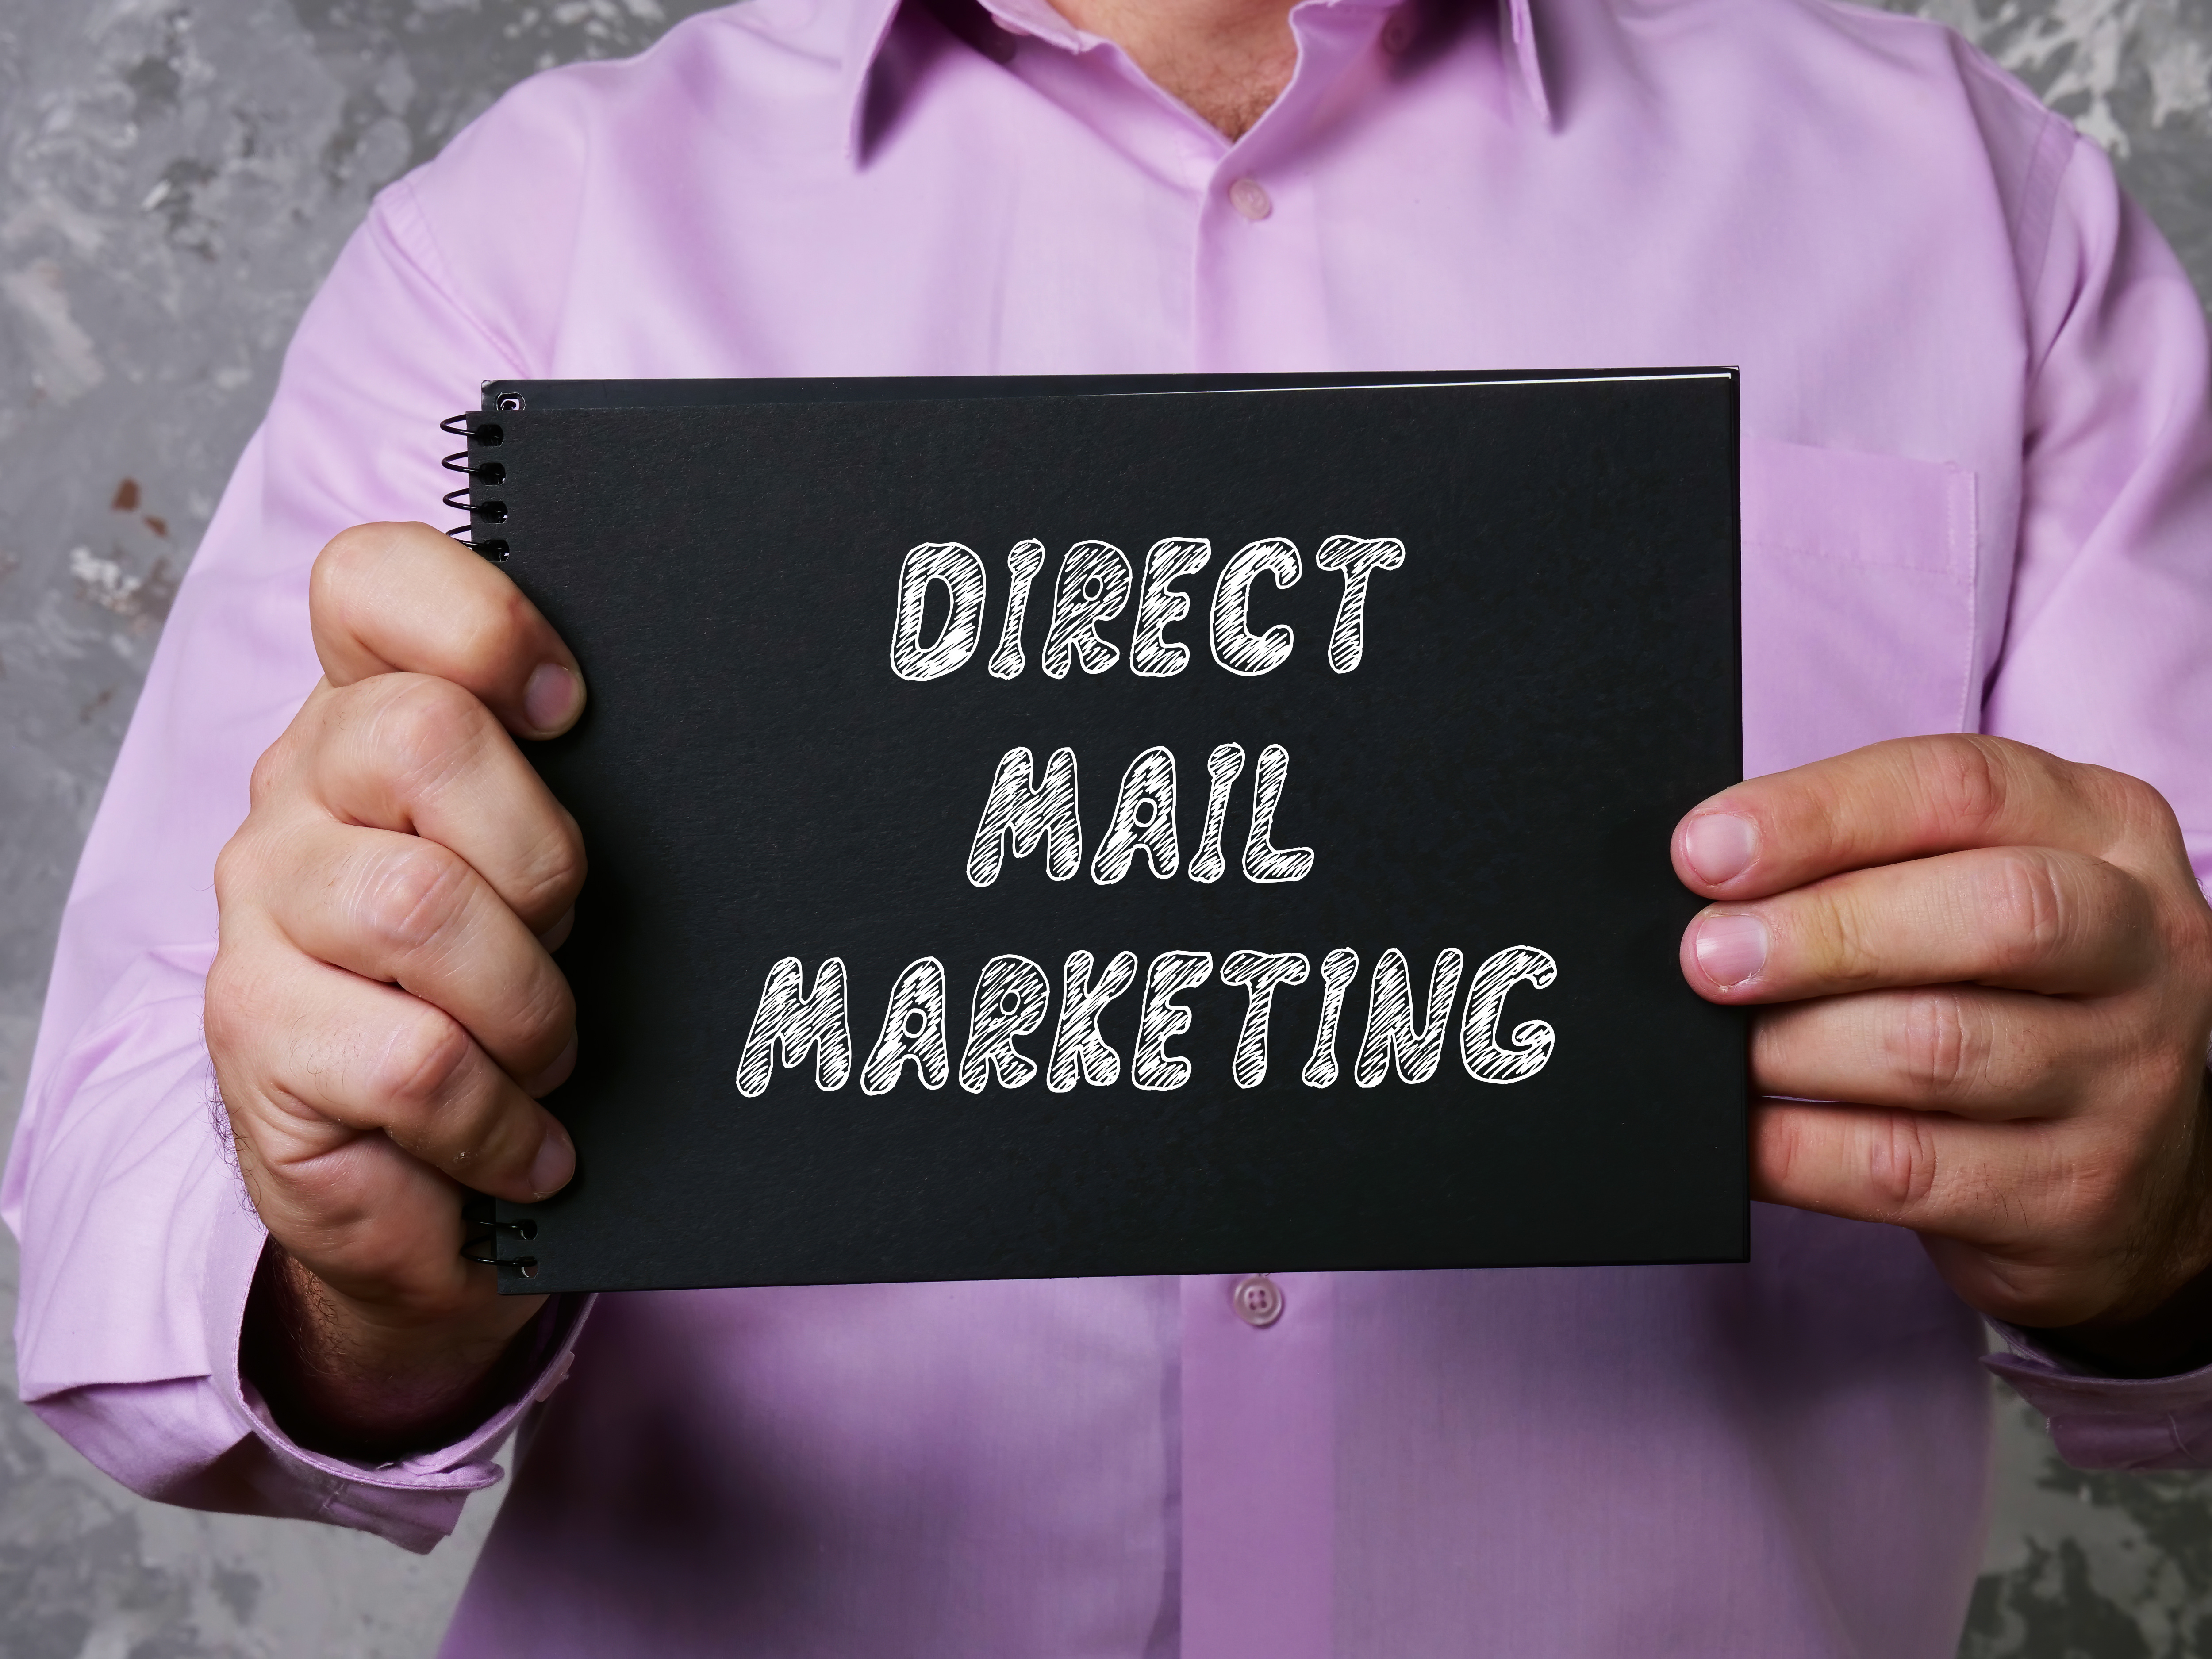 an image of a person holding up a black piece of paper that says “direct mail marketing” in white font.